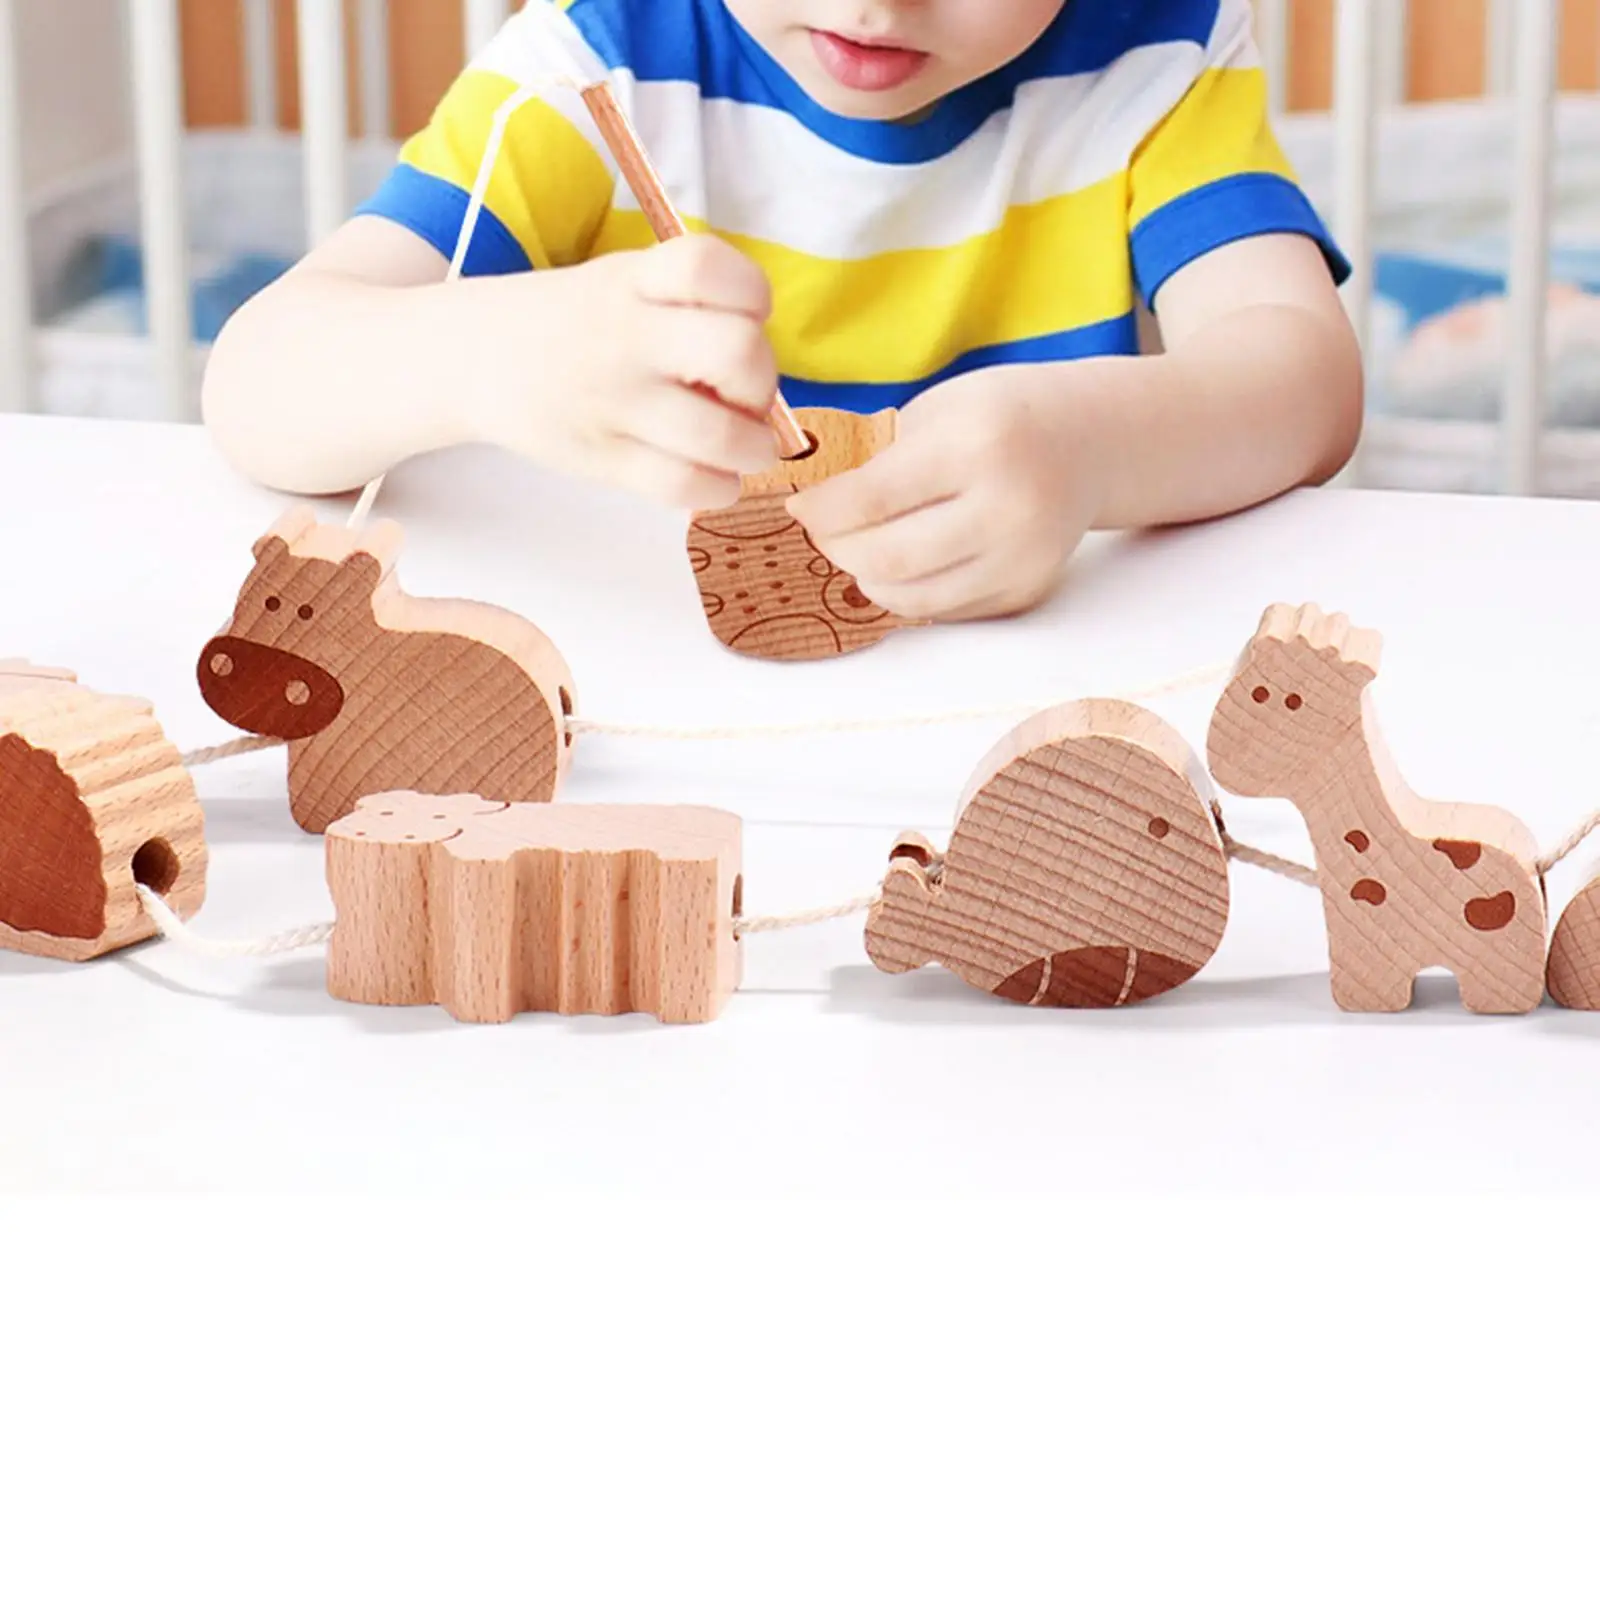 16Pcs Wooden Animal Blocks Lacing Toy Learning Activities Monterssori for Birthday Gift Toddlers Boy Girl Children Preschool